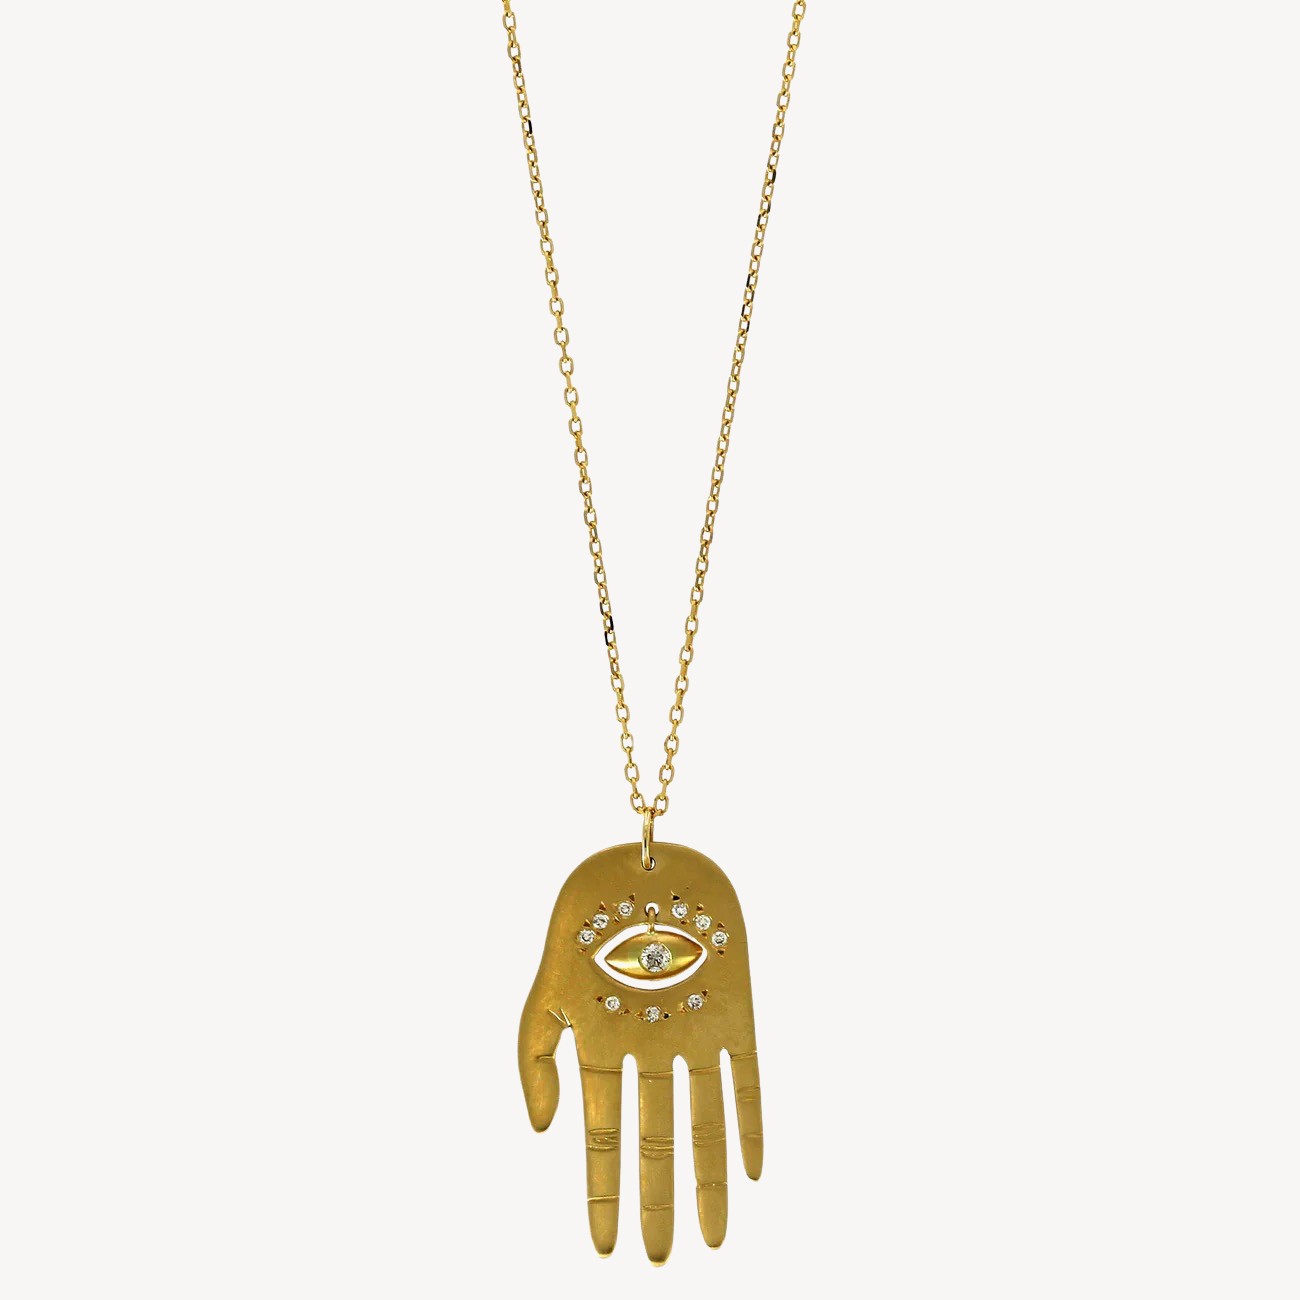 Large Dharma Hand Necklace